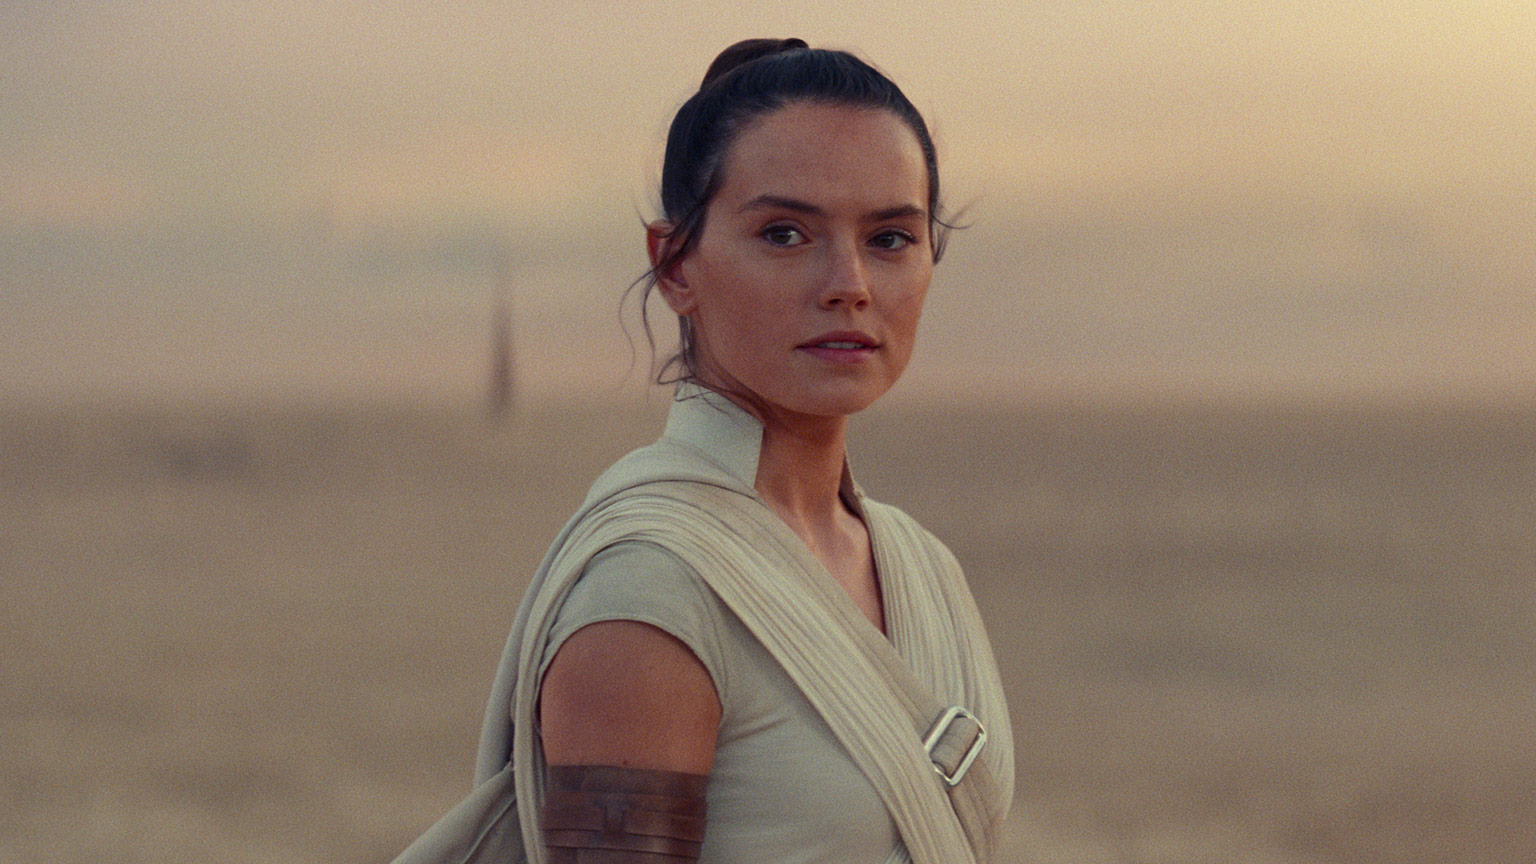 annie salome recommends Images Of Rey From Star Wars